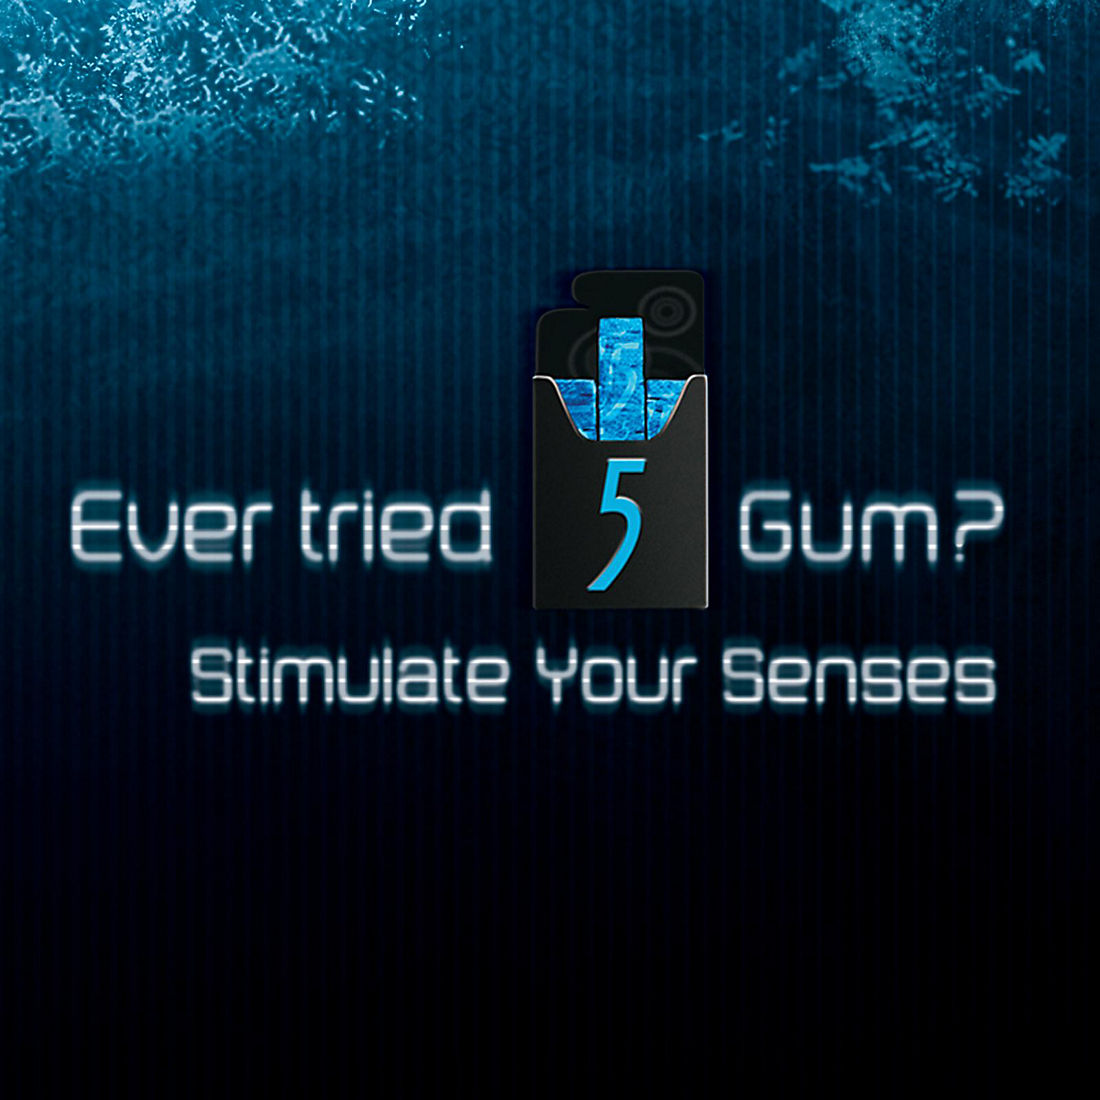 andrew nuernberger add photo how to chew 5 gum bj